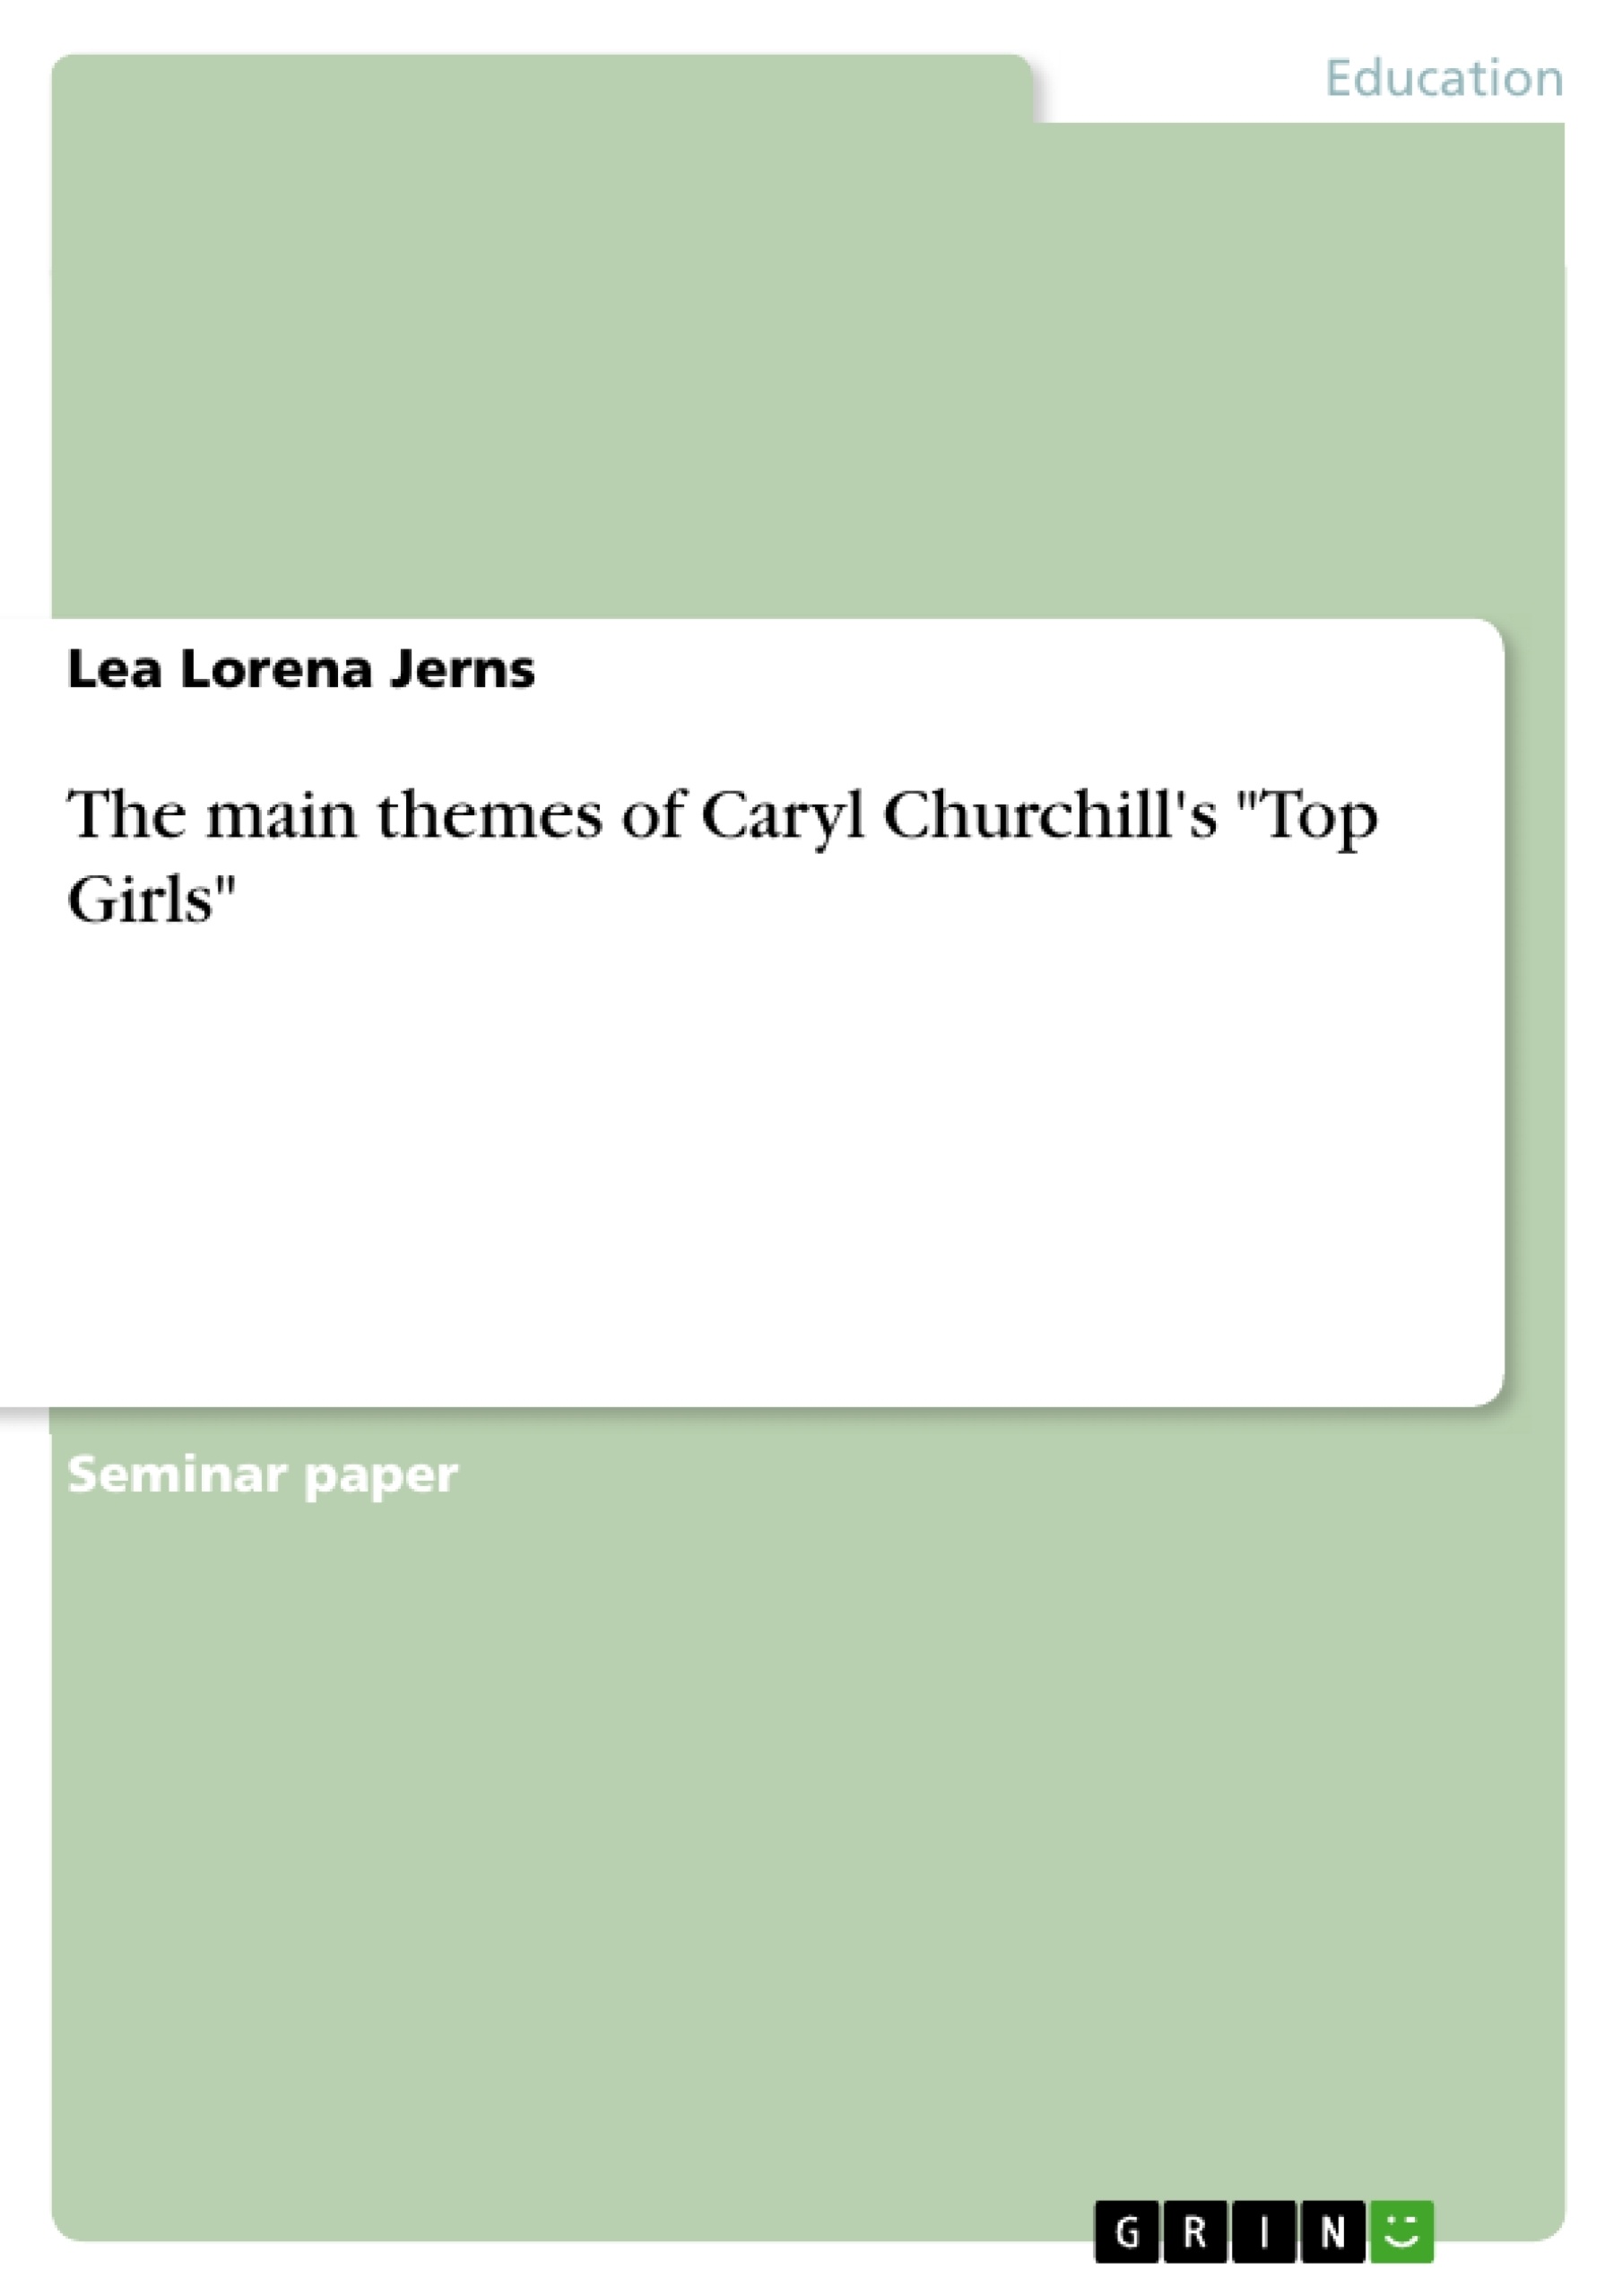 Título: The main themes of Caryl Churchill's "Top Girls"